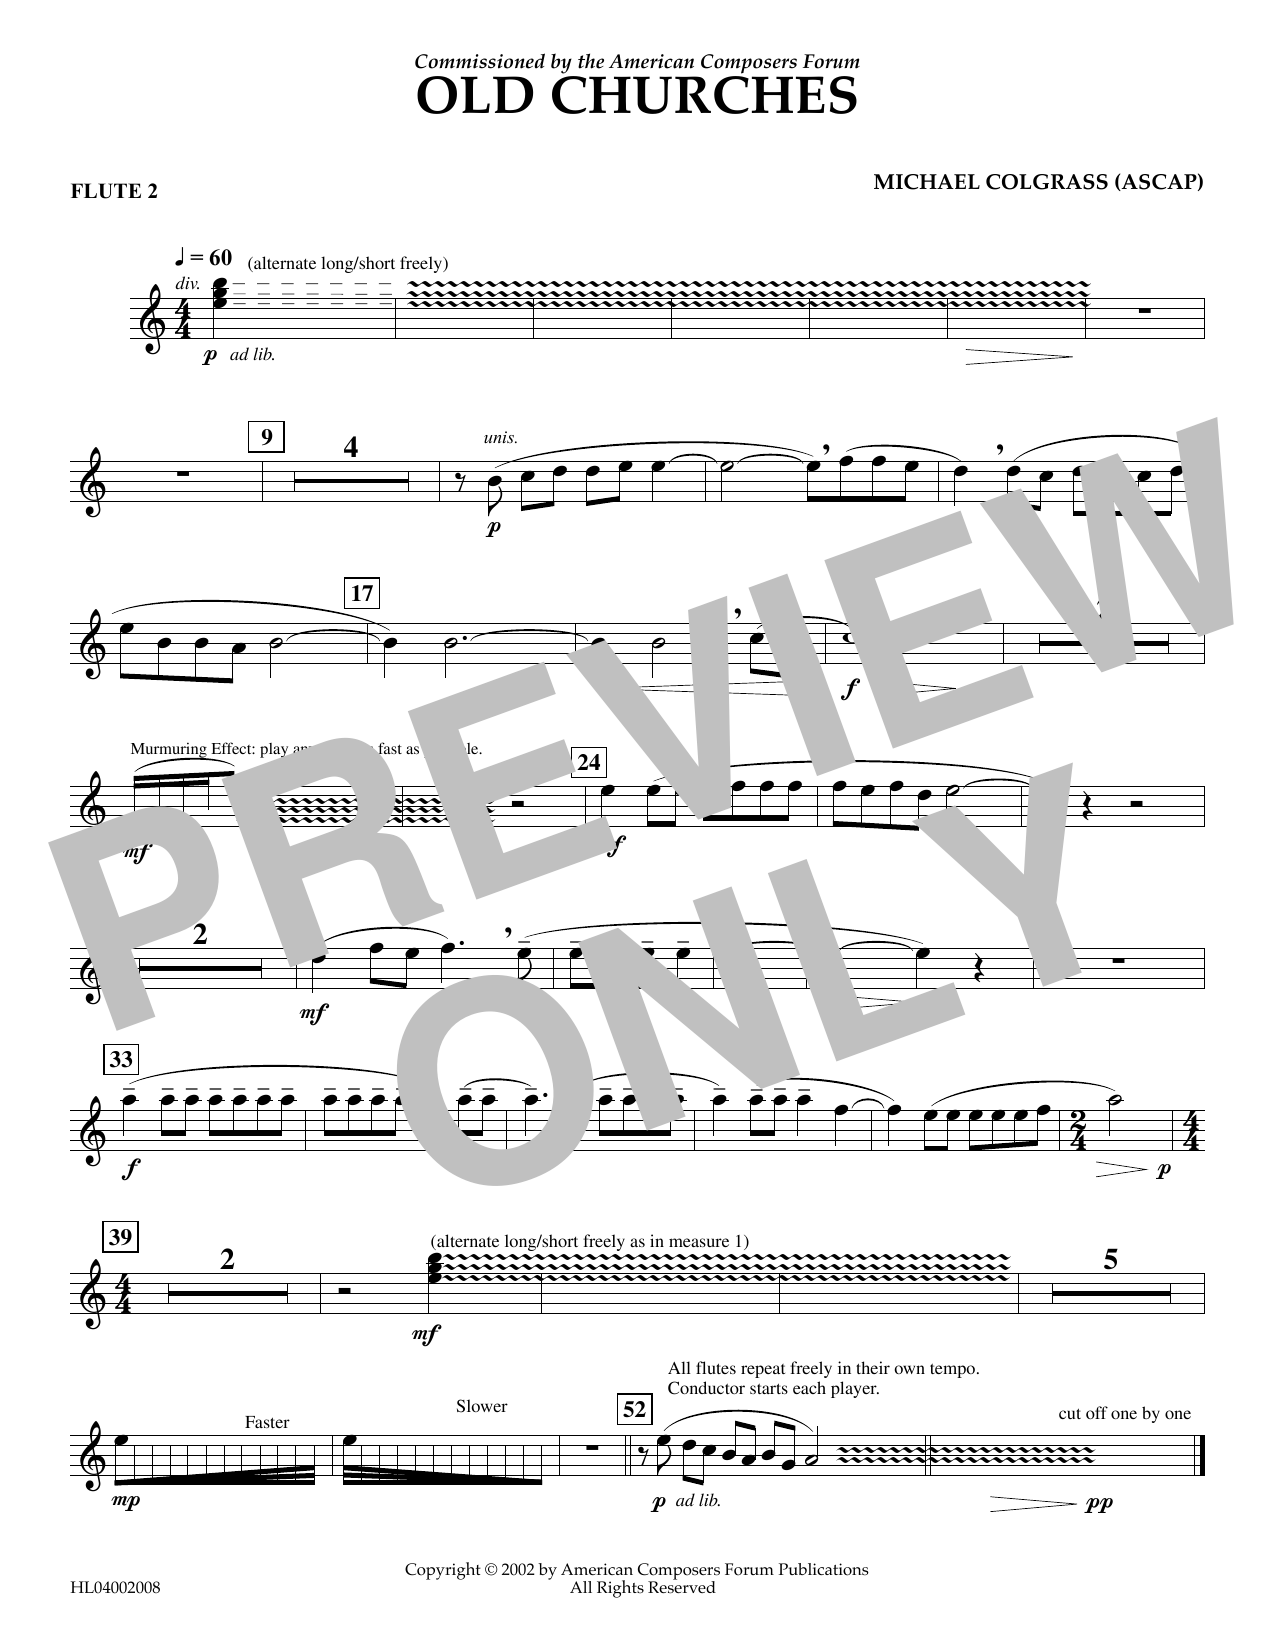 Download Michael Colgrass Old Churches - Flute 2 Sheet Music